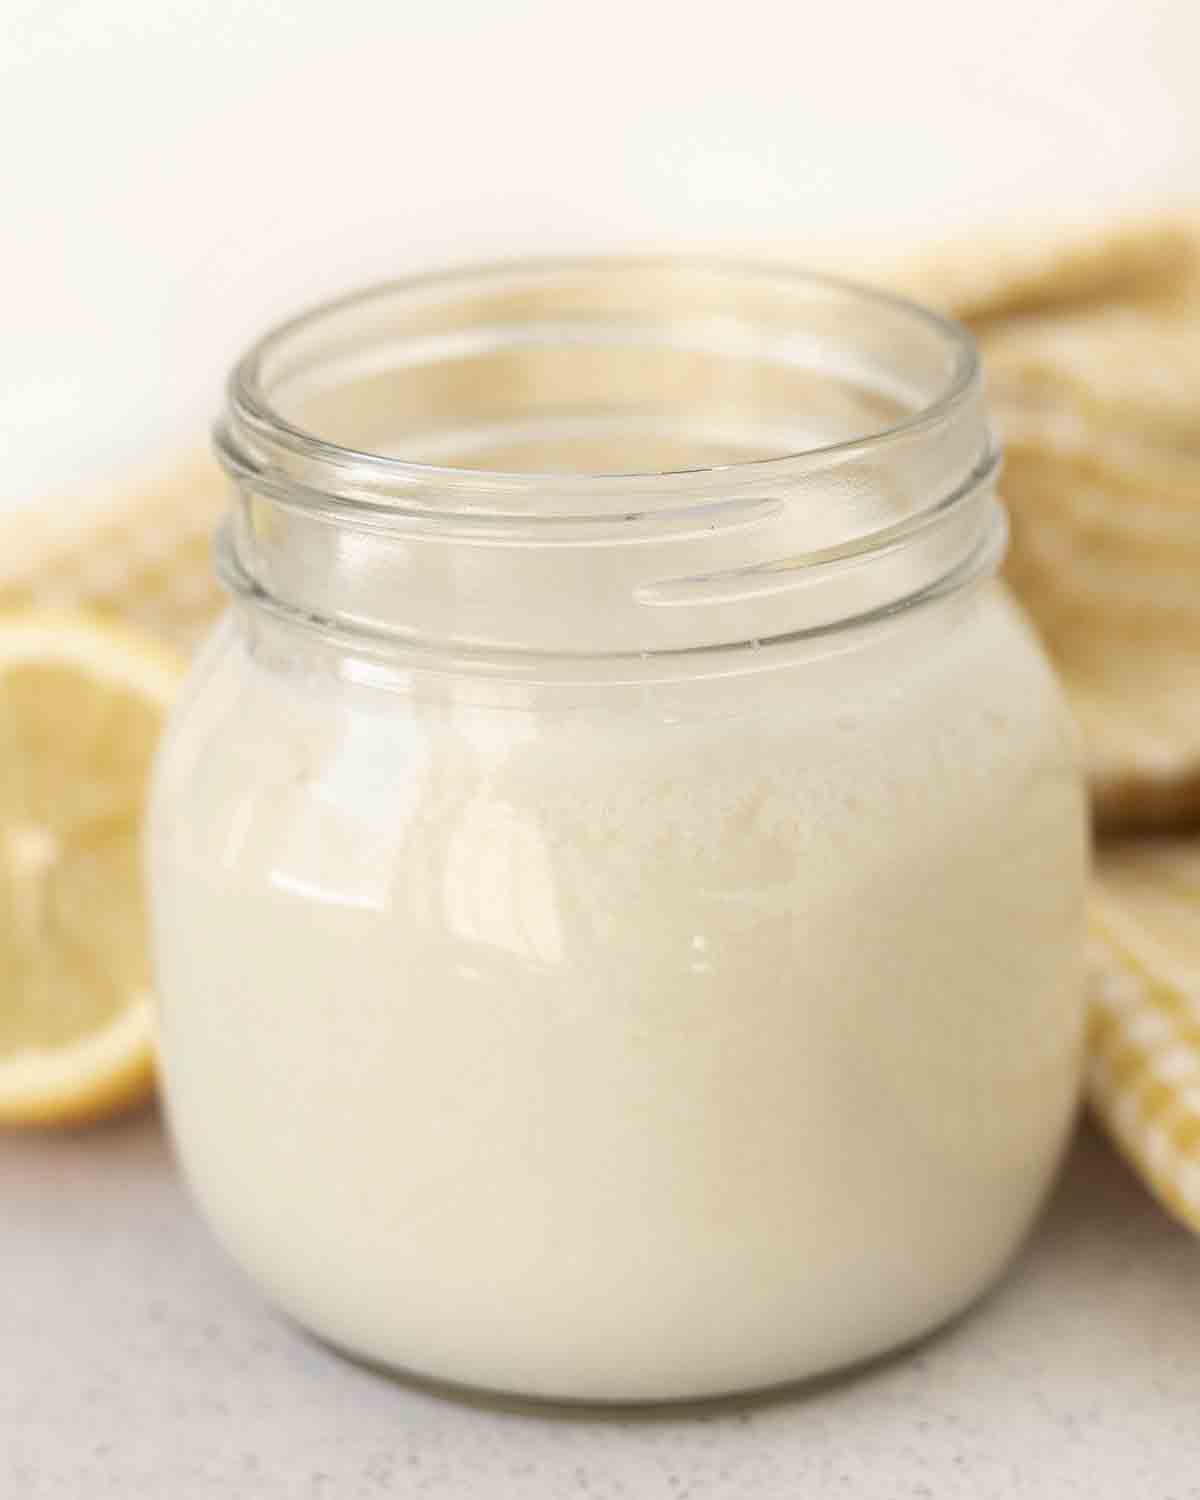 A small jar filled with vegan buttermilk made with almond milk.